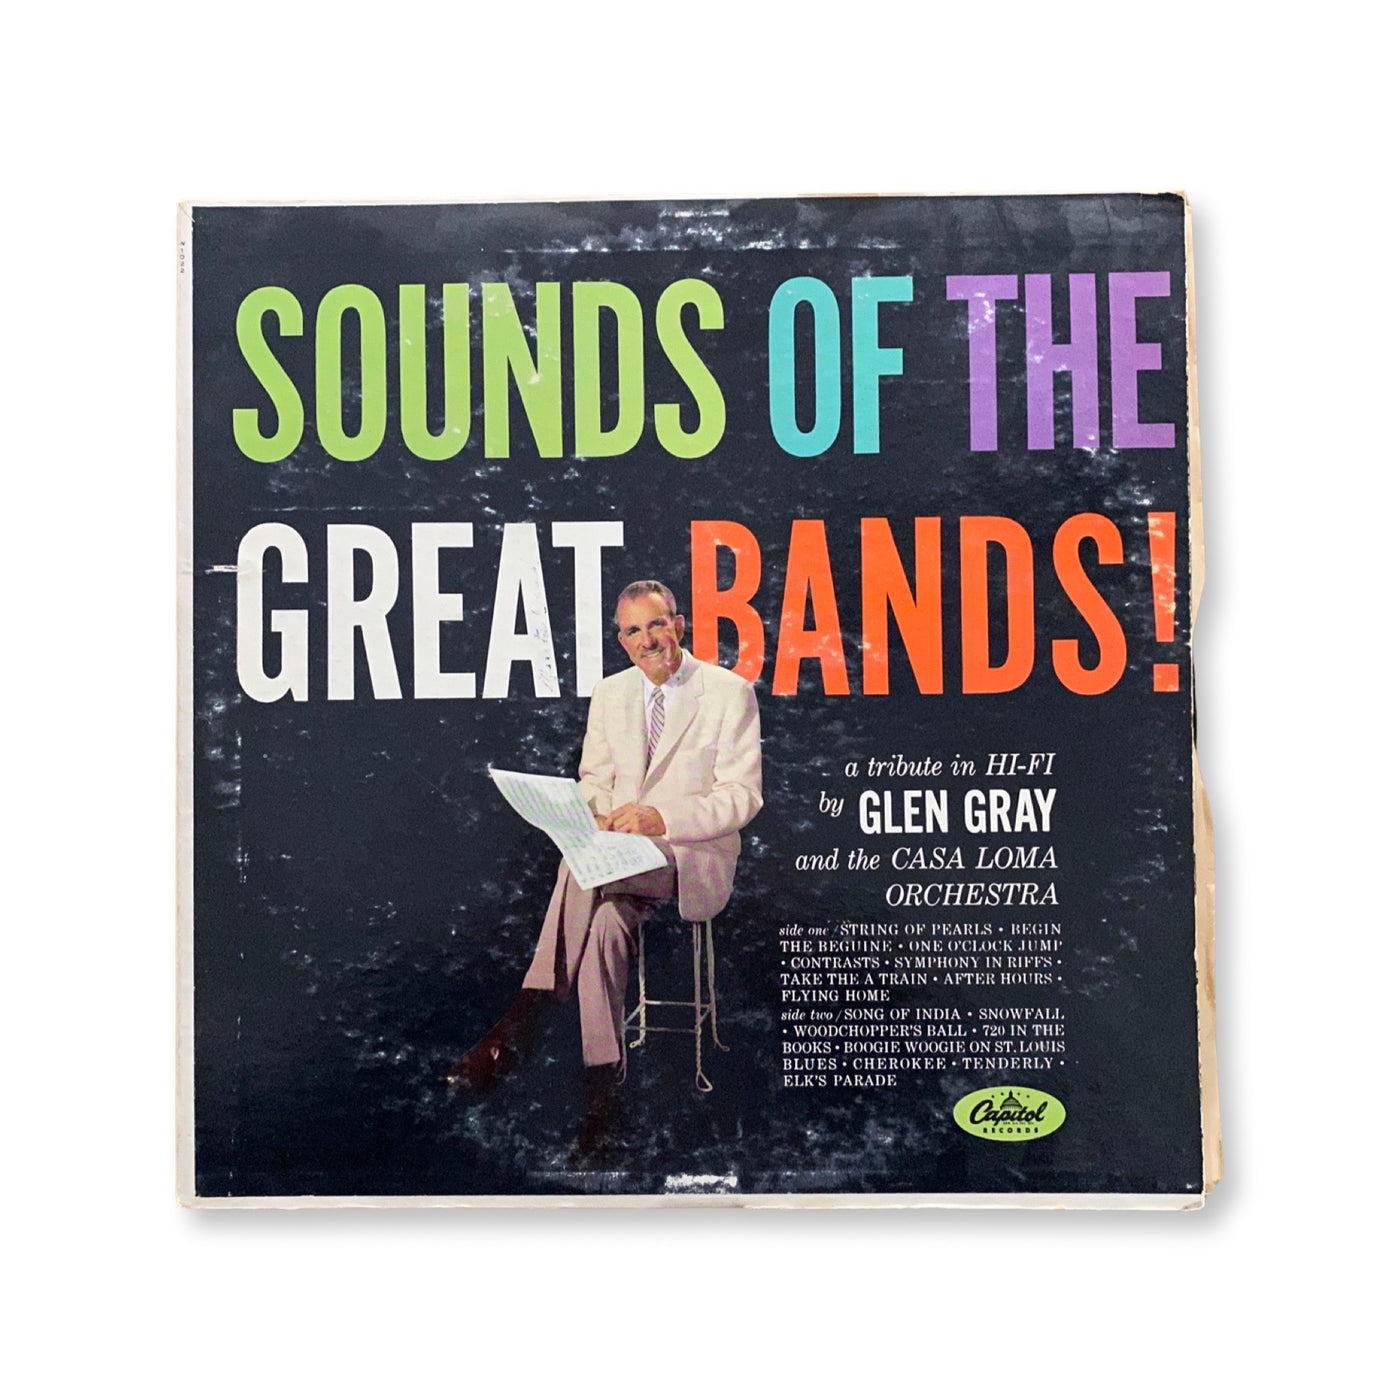 Glen Gray & The Casa Loma Orchestra - Sounds Of The Great Bands!